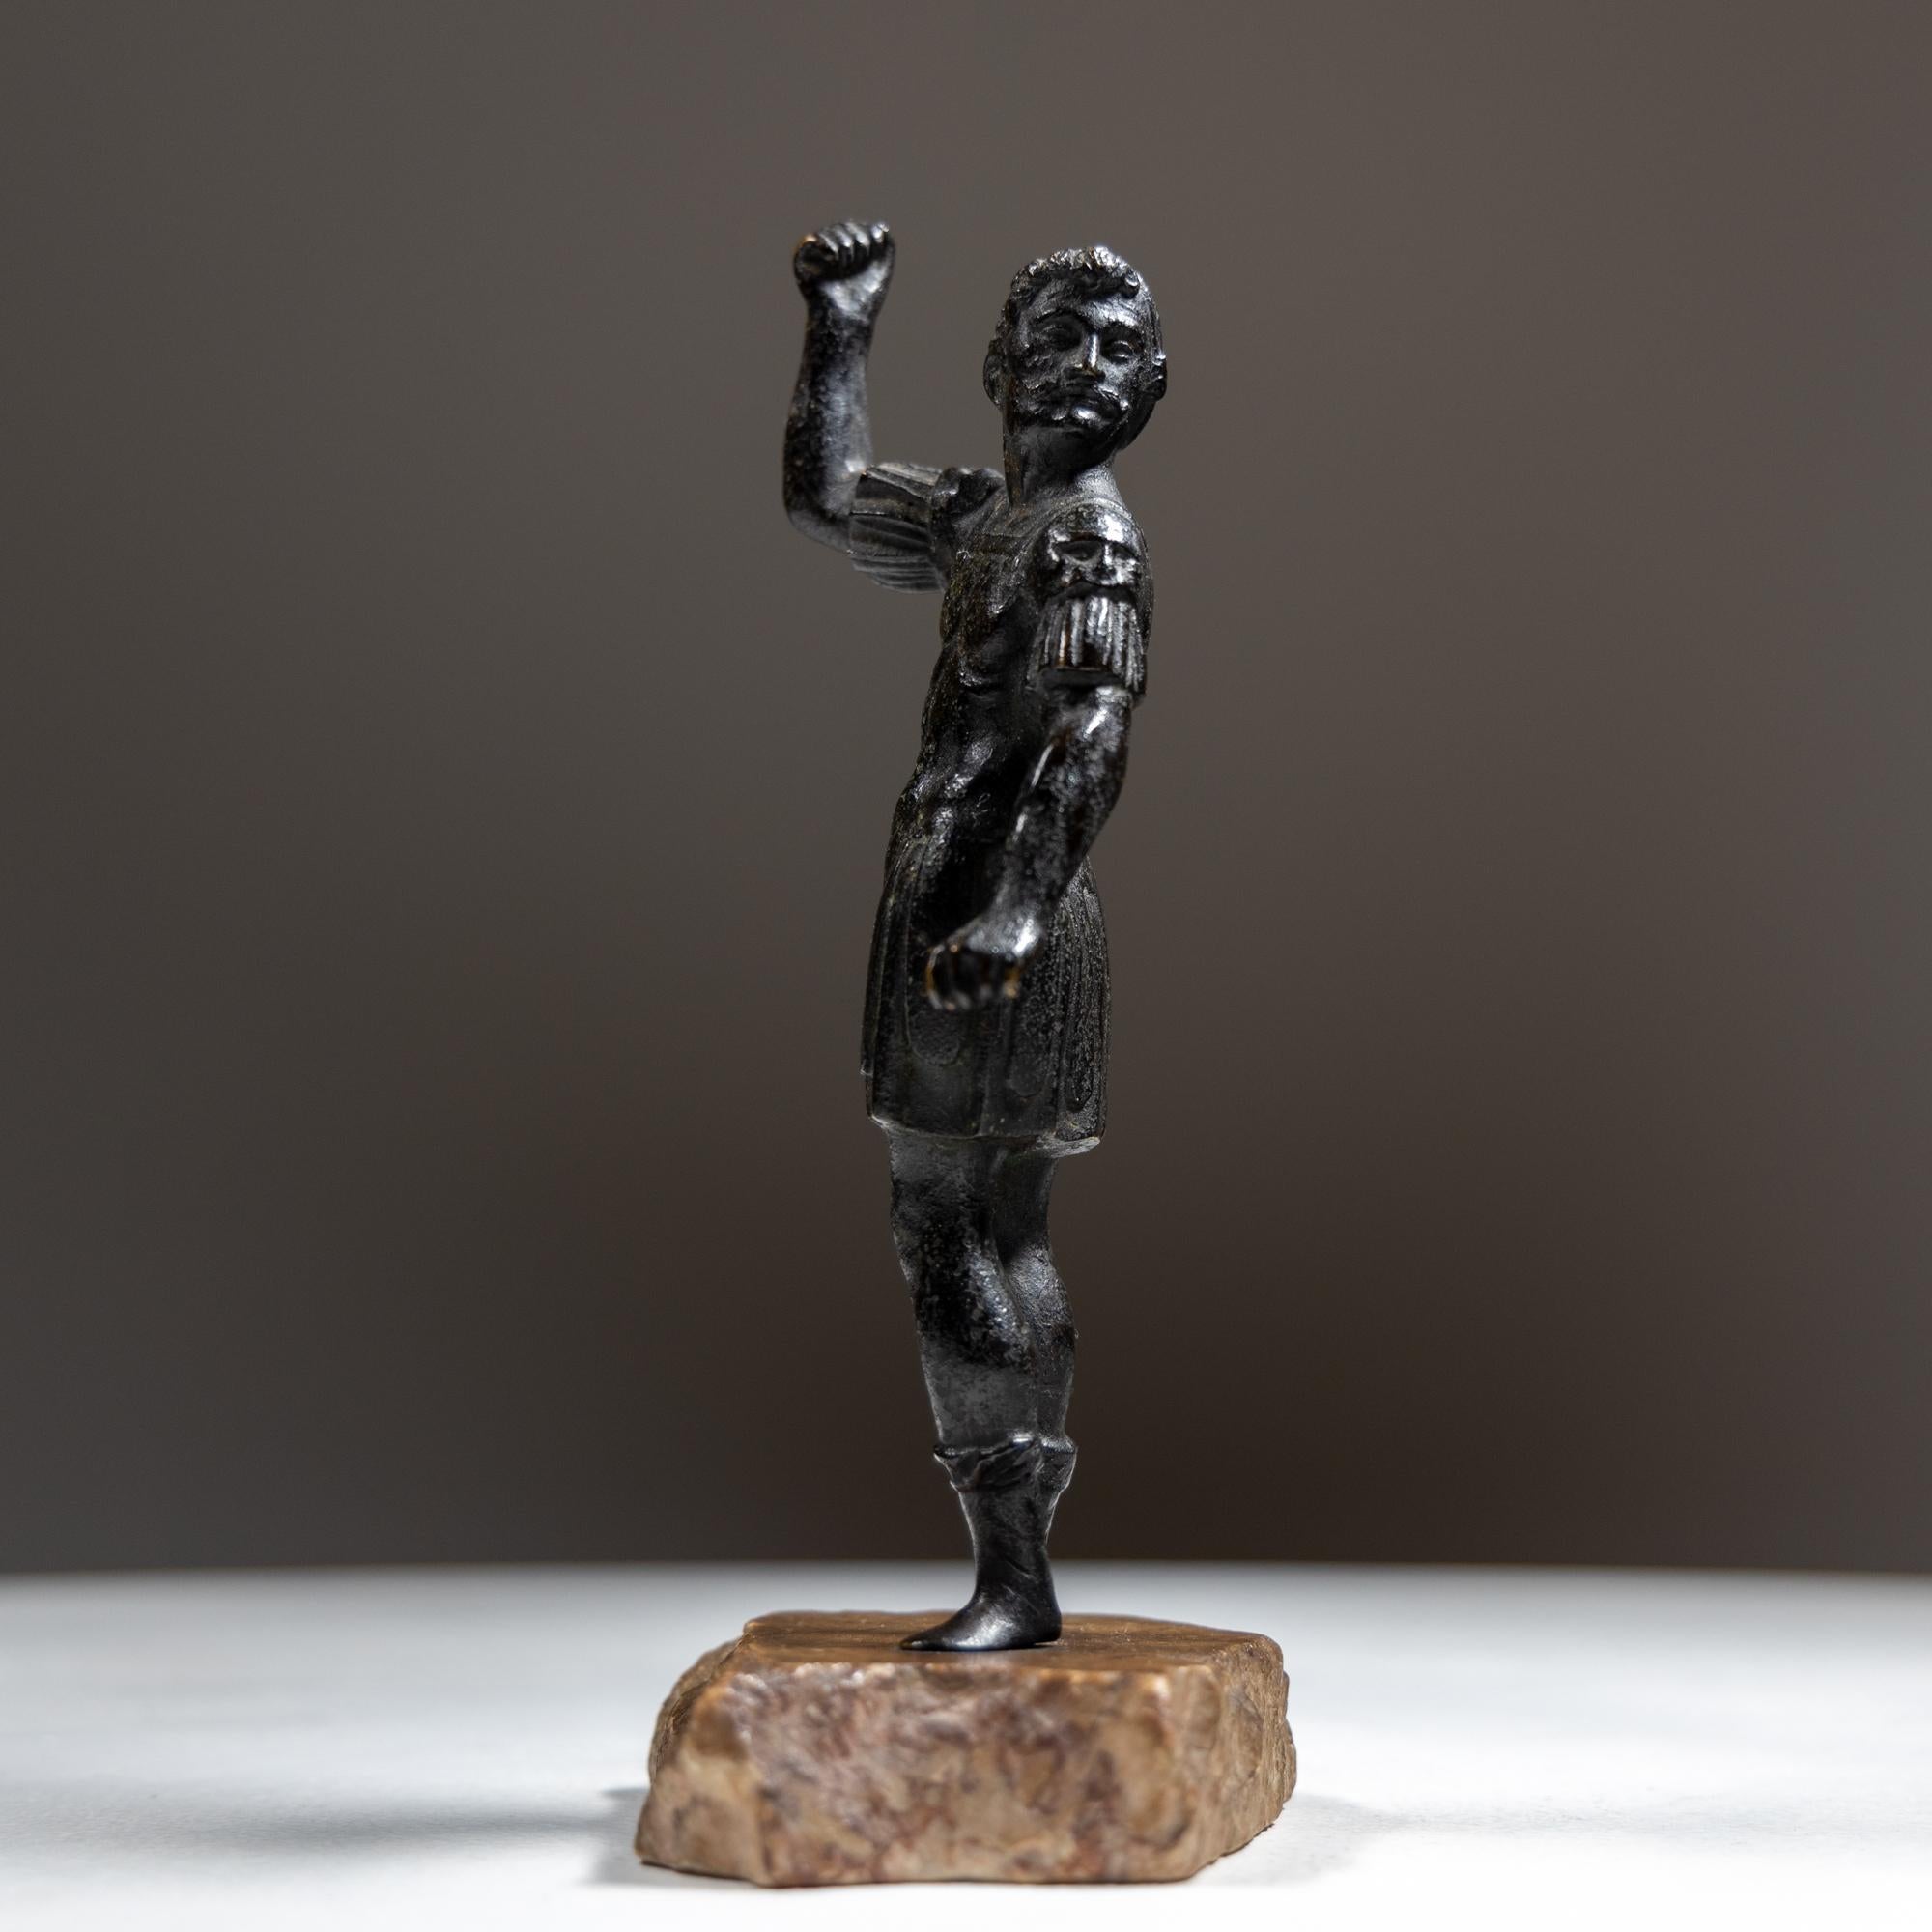 18th Century and Earlier Bronze statuette of a Venetian mercenary, Italy 16th/17th century